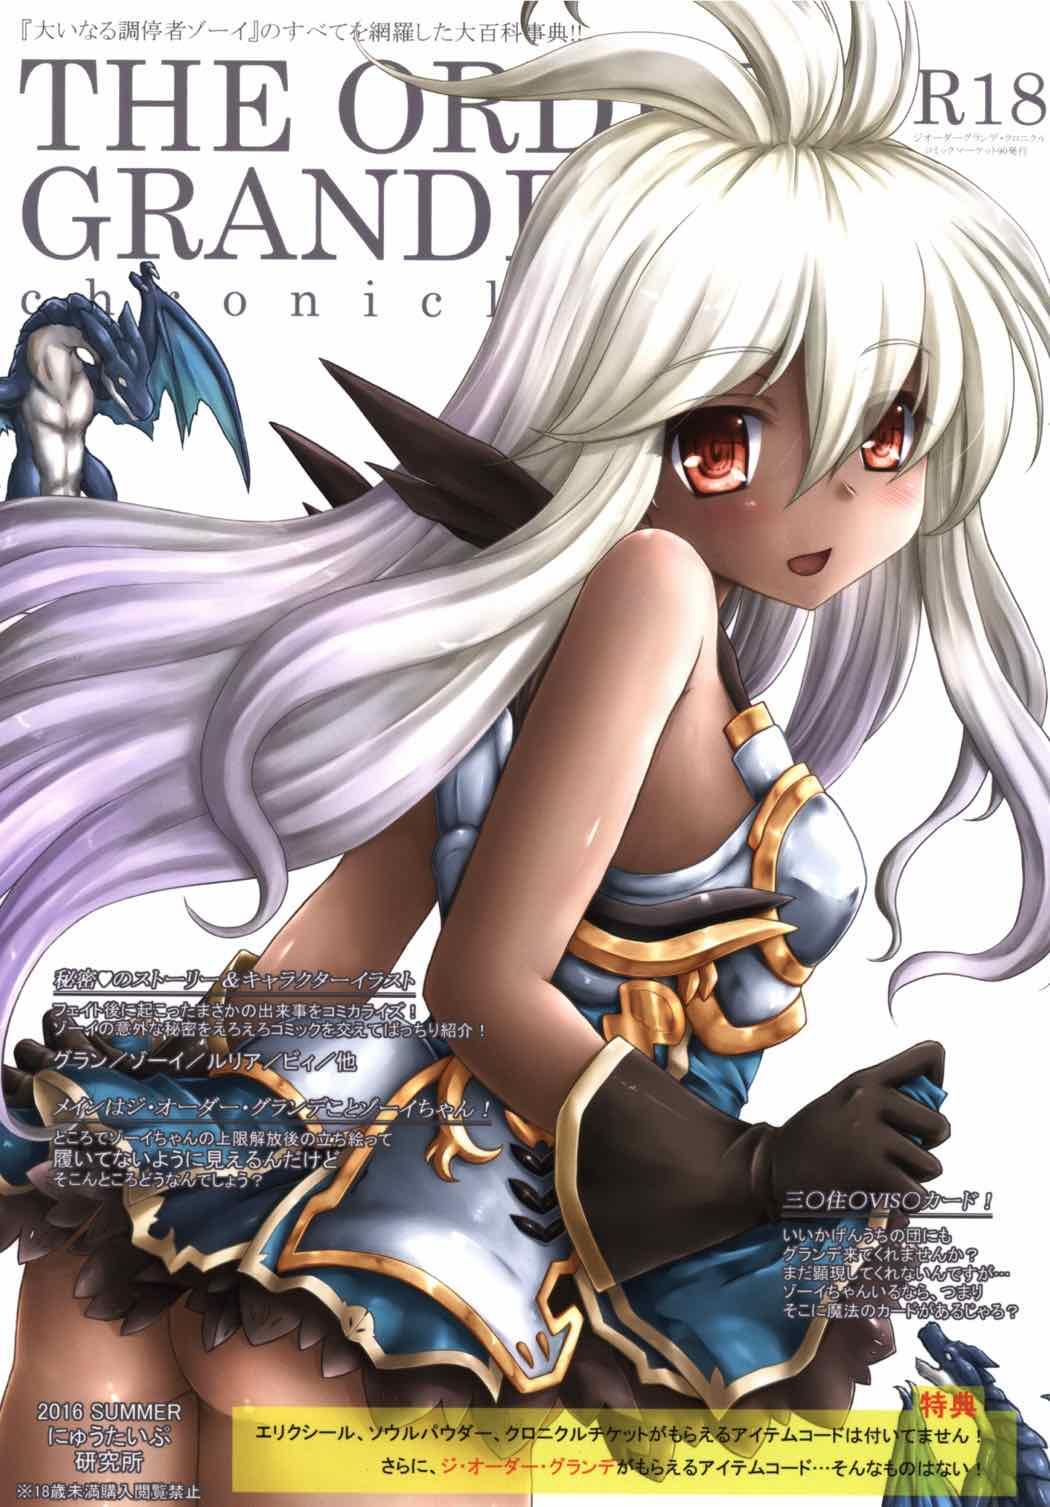 Spread THE ORDER GRANDE chronicle - Granblue fantasy Ass Worship - Page 1